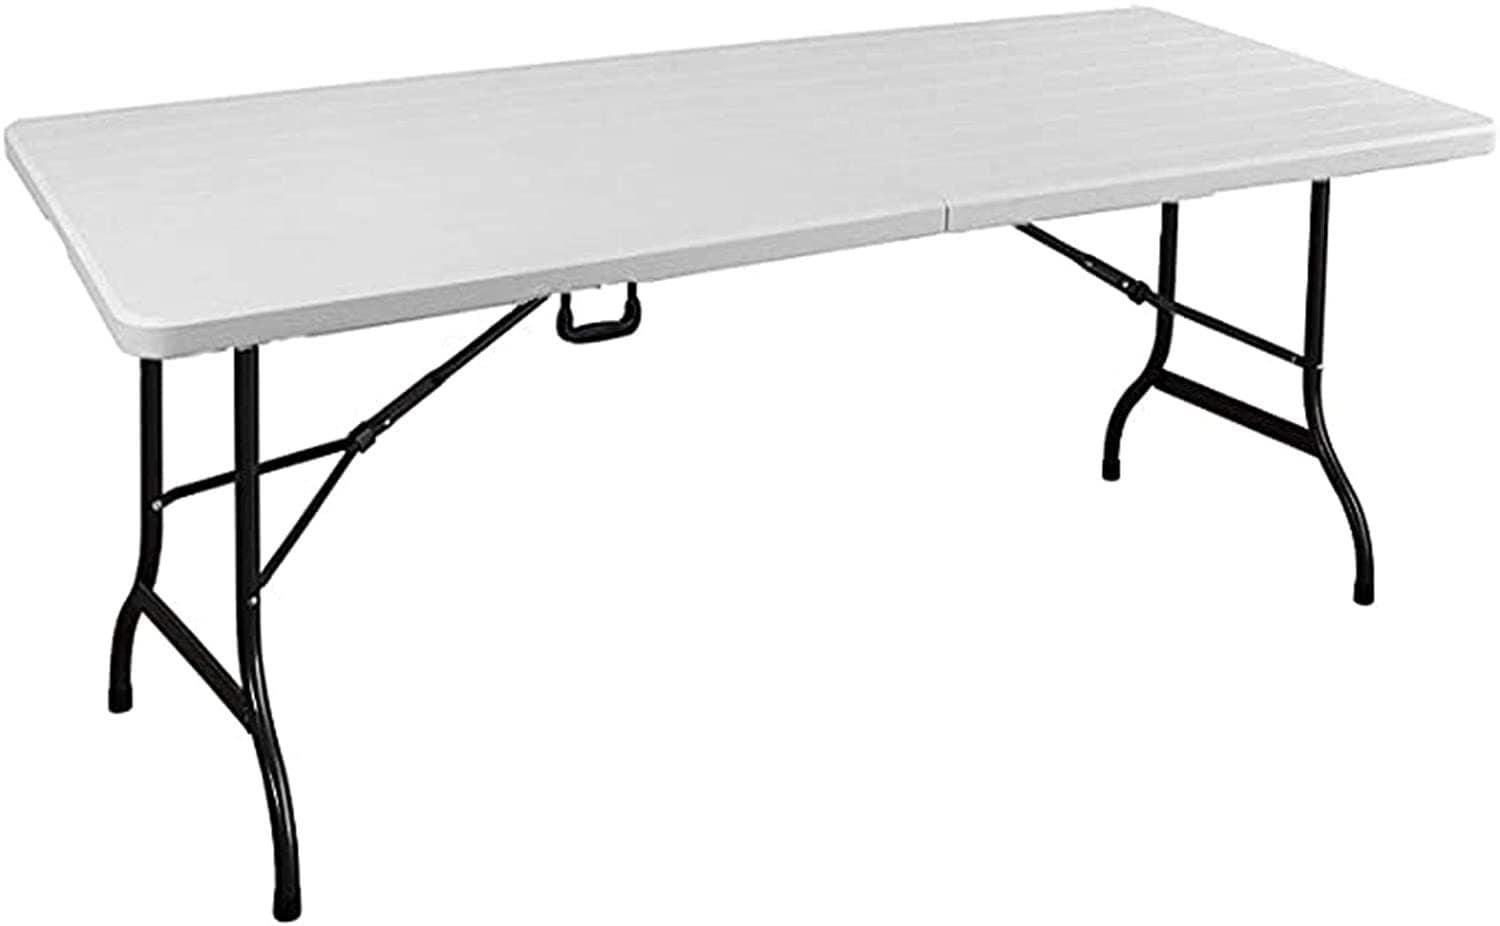 LANNY Portable Plastic Folding Table SZK180 White Wood Design 180 * 75cm for 6-8 person Party/Picnic/Garden/Dining/Kitchen/Buffee/Restaurant